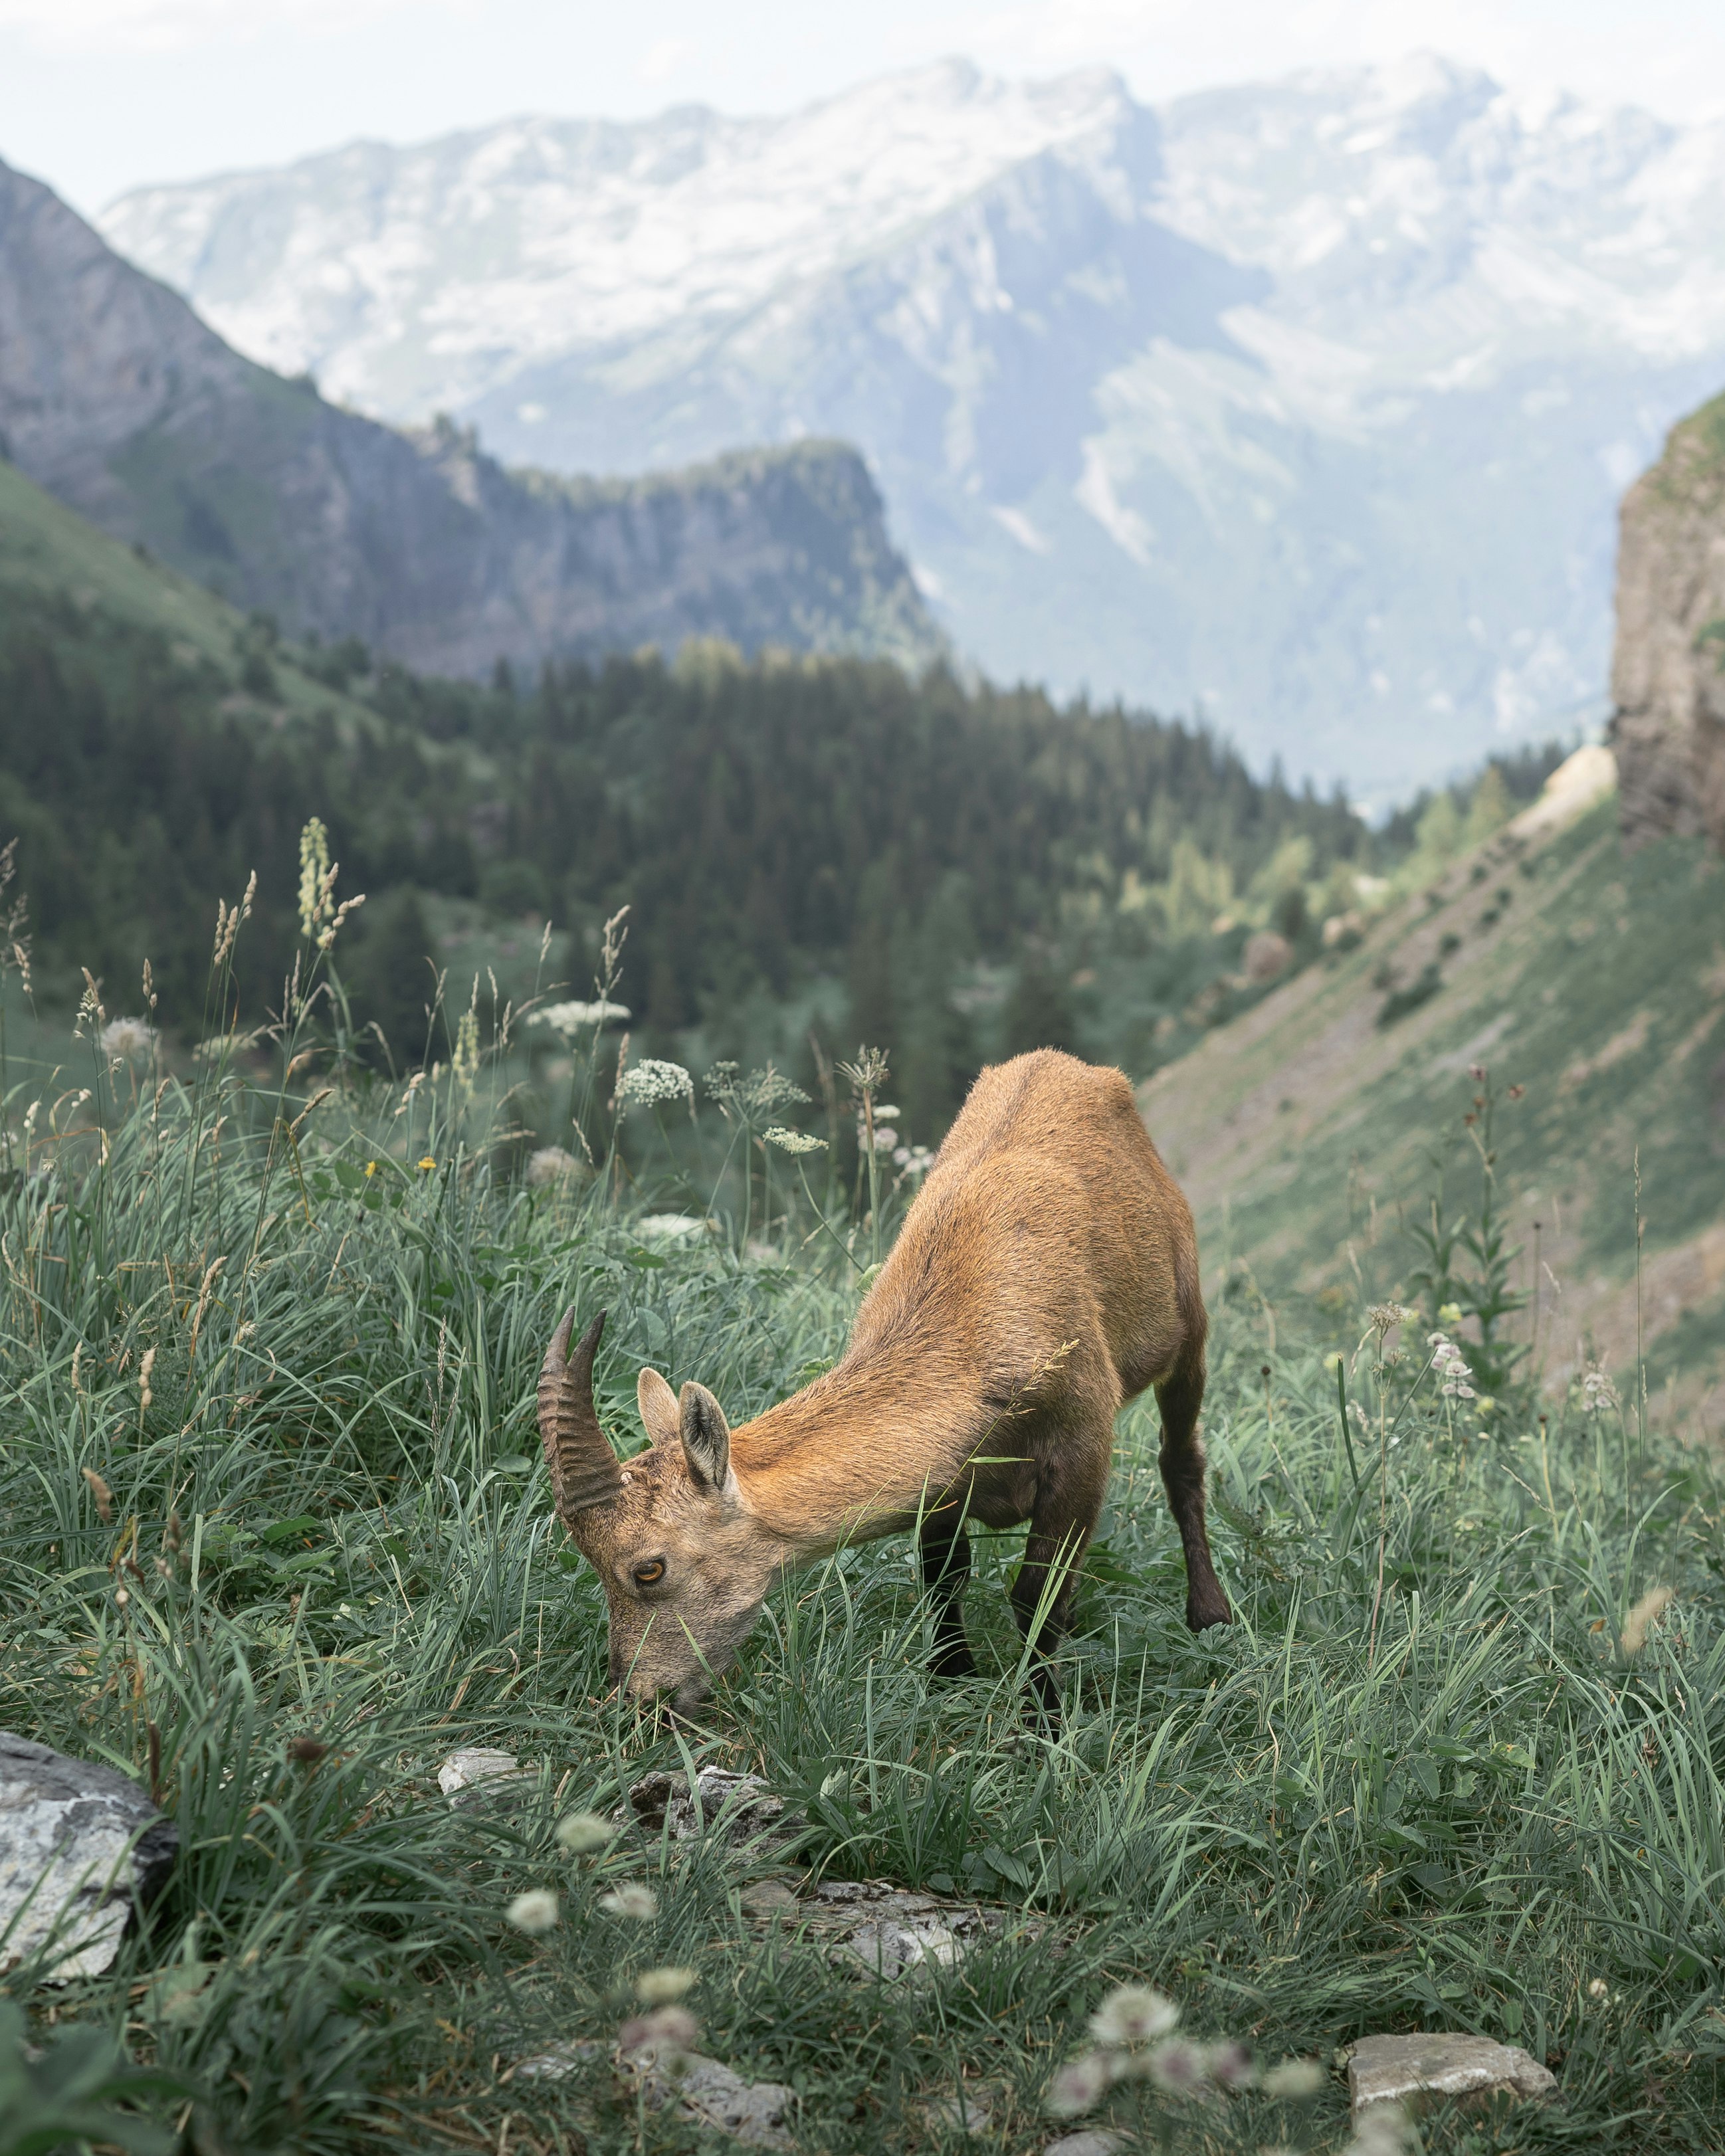 During a long walk through the French Alpes we stumbled across this lovely ibex.